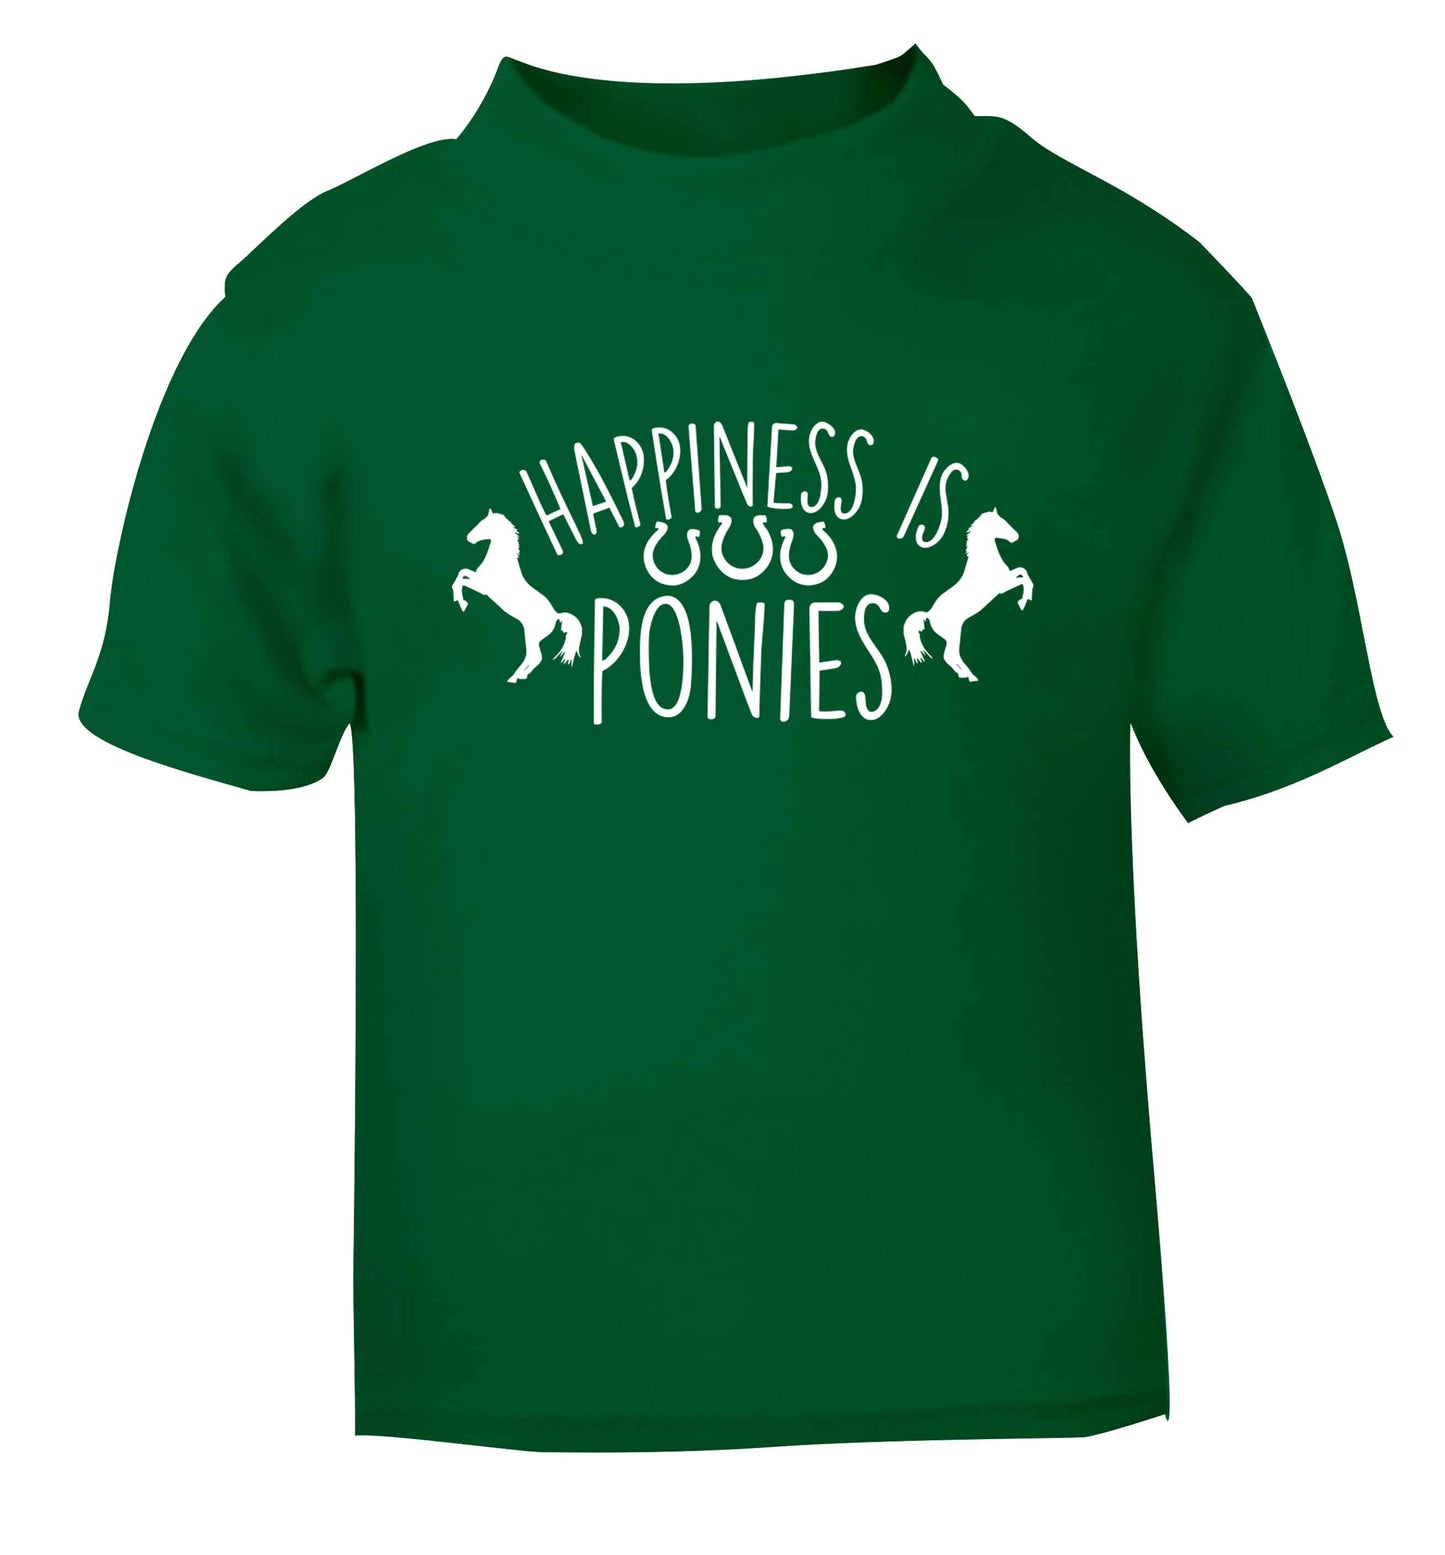 Happiness is ponies green baby toddler Tshirt 2 Years